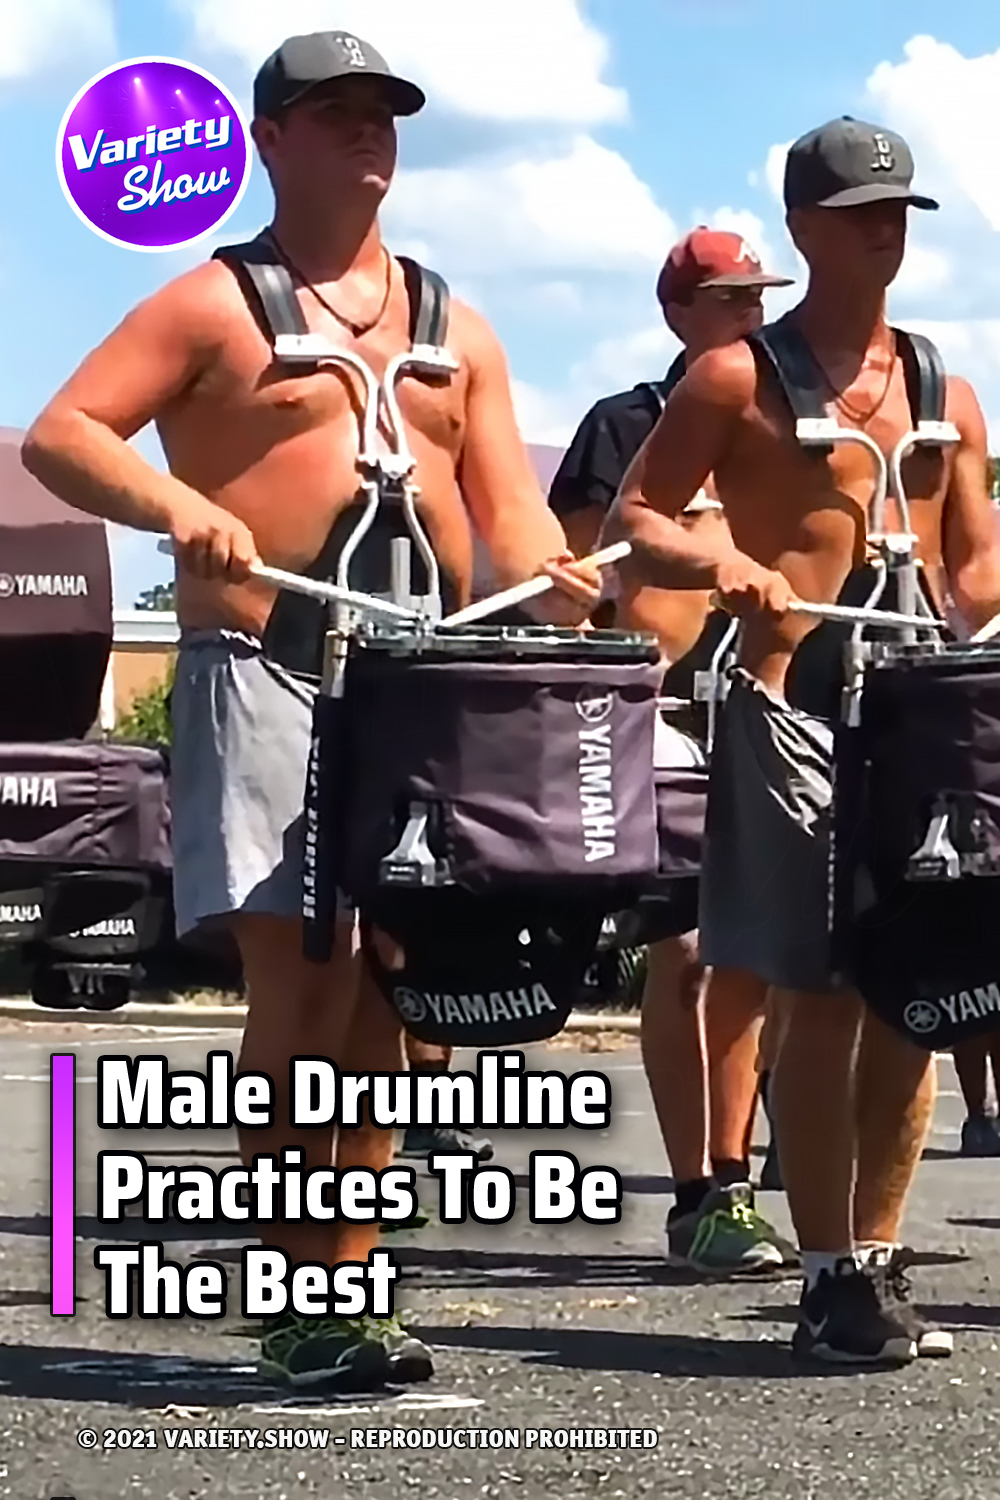 Male Drumline Practices To Be The Best